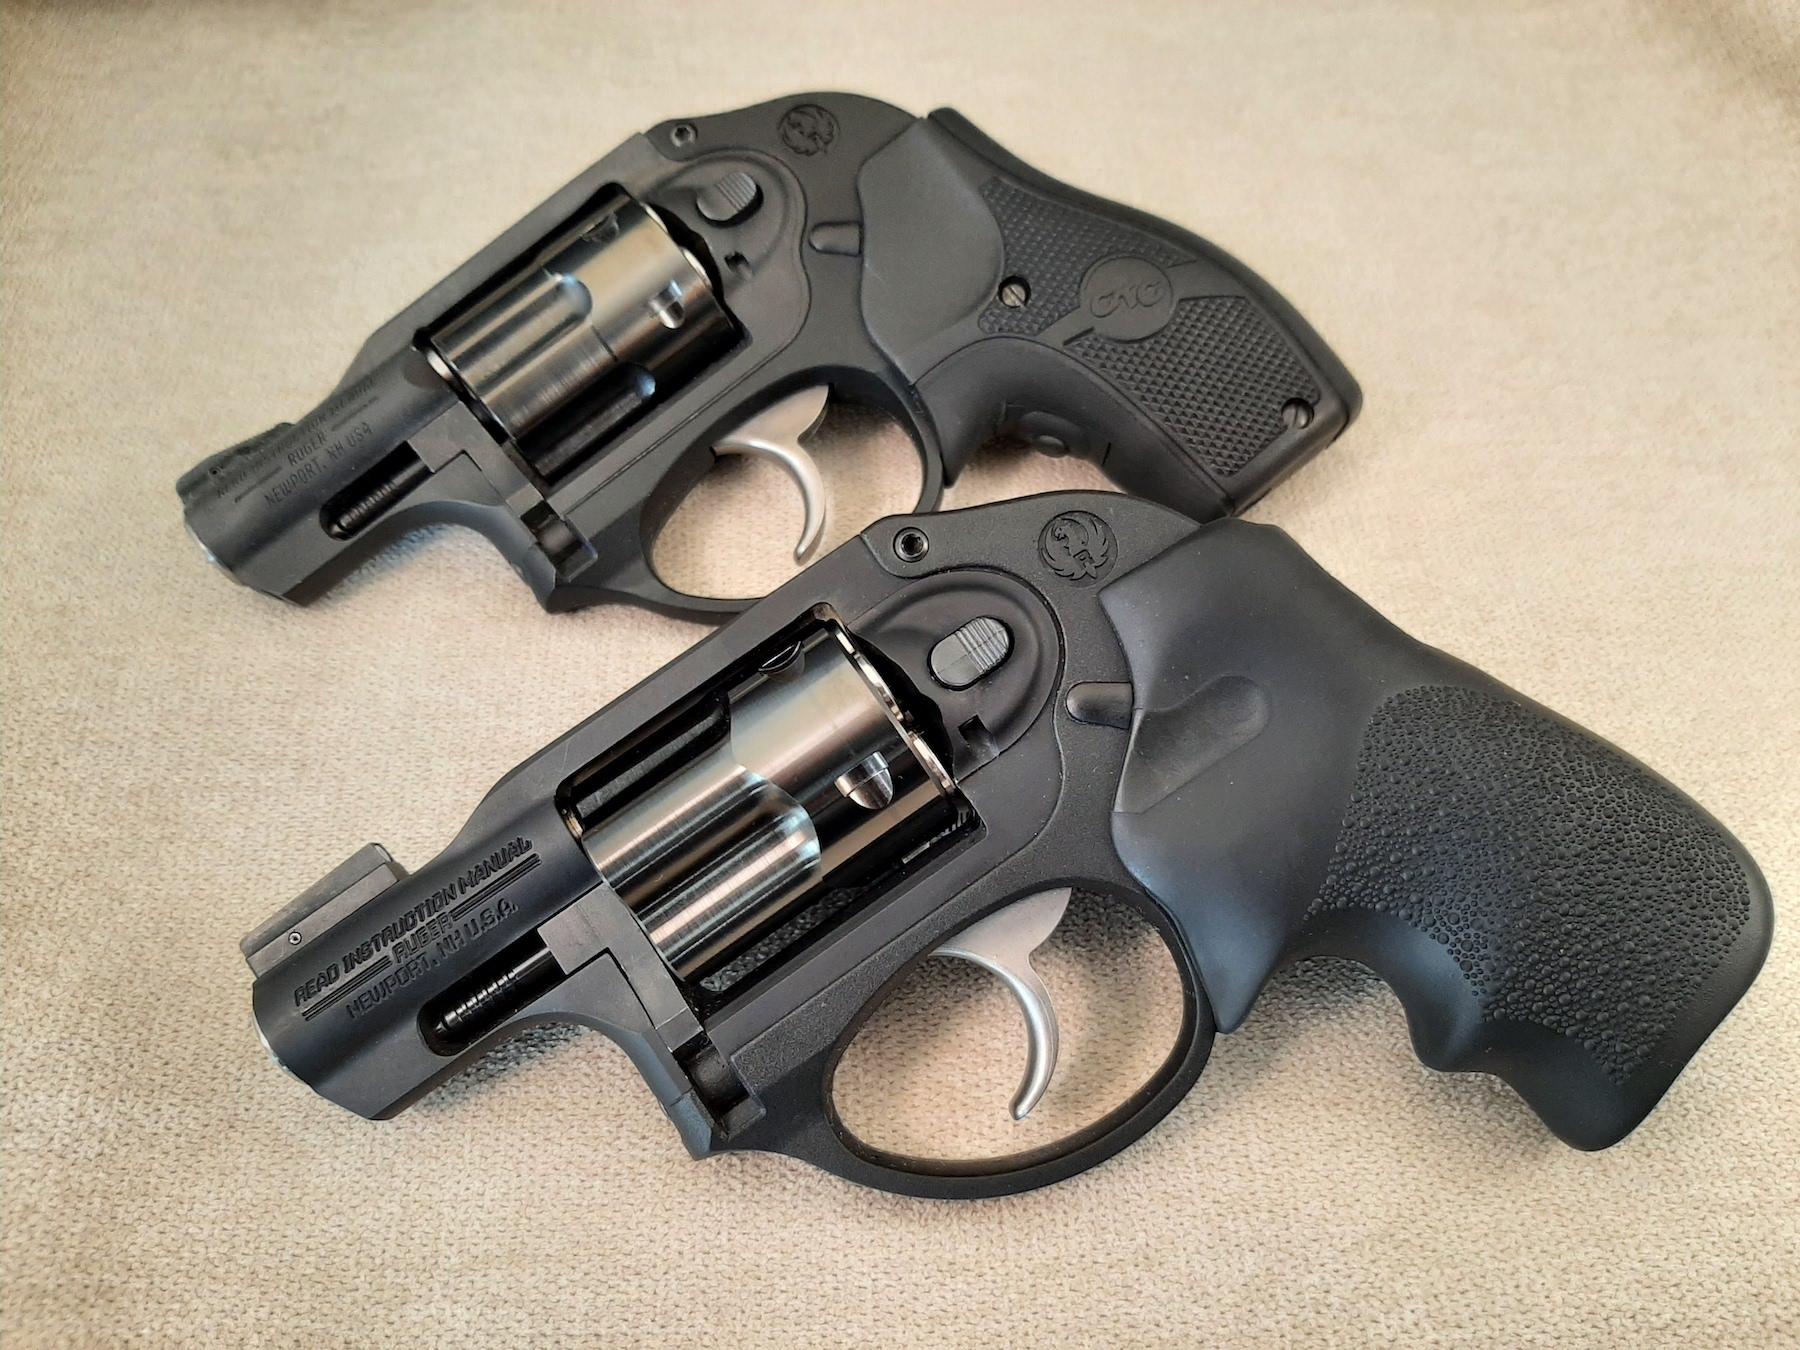 Considering the 9mm Revolver - American Cop